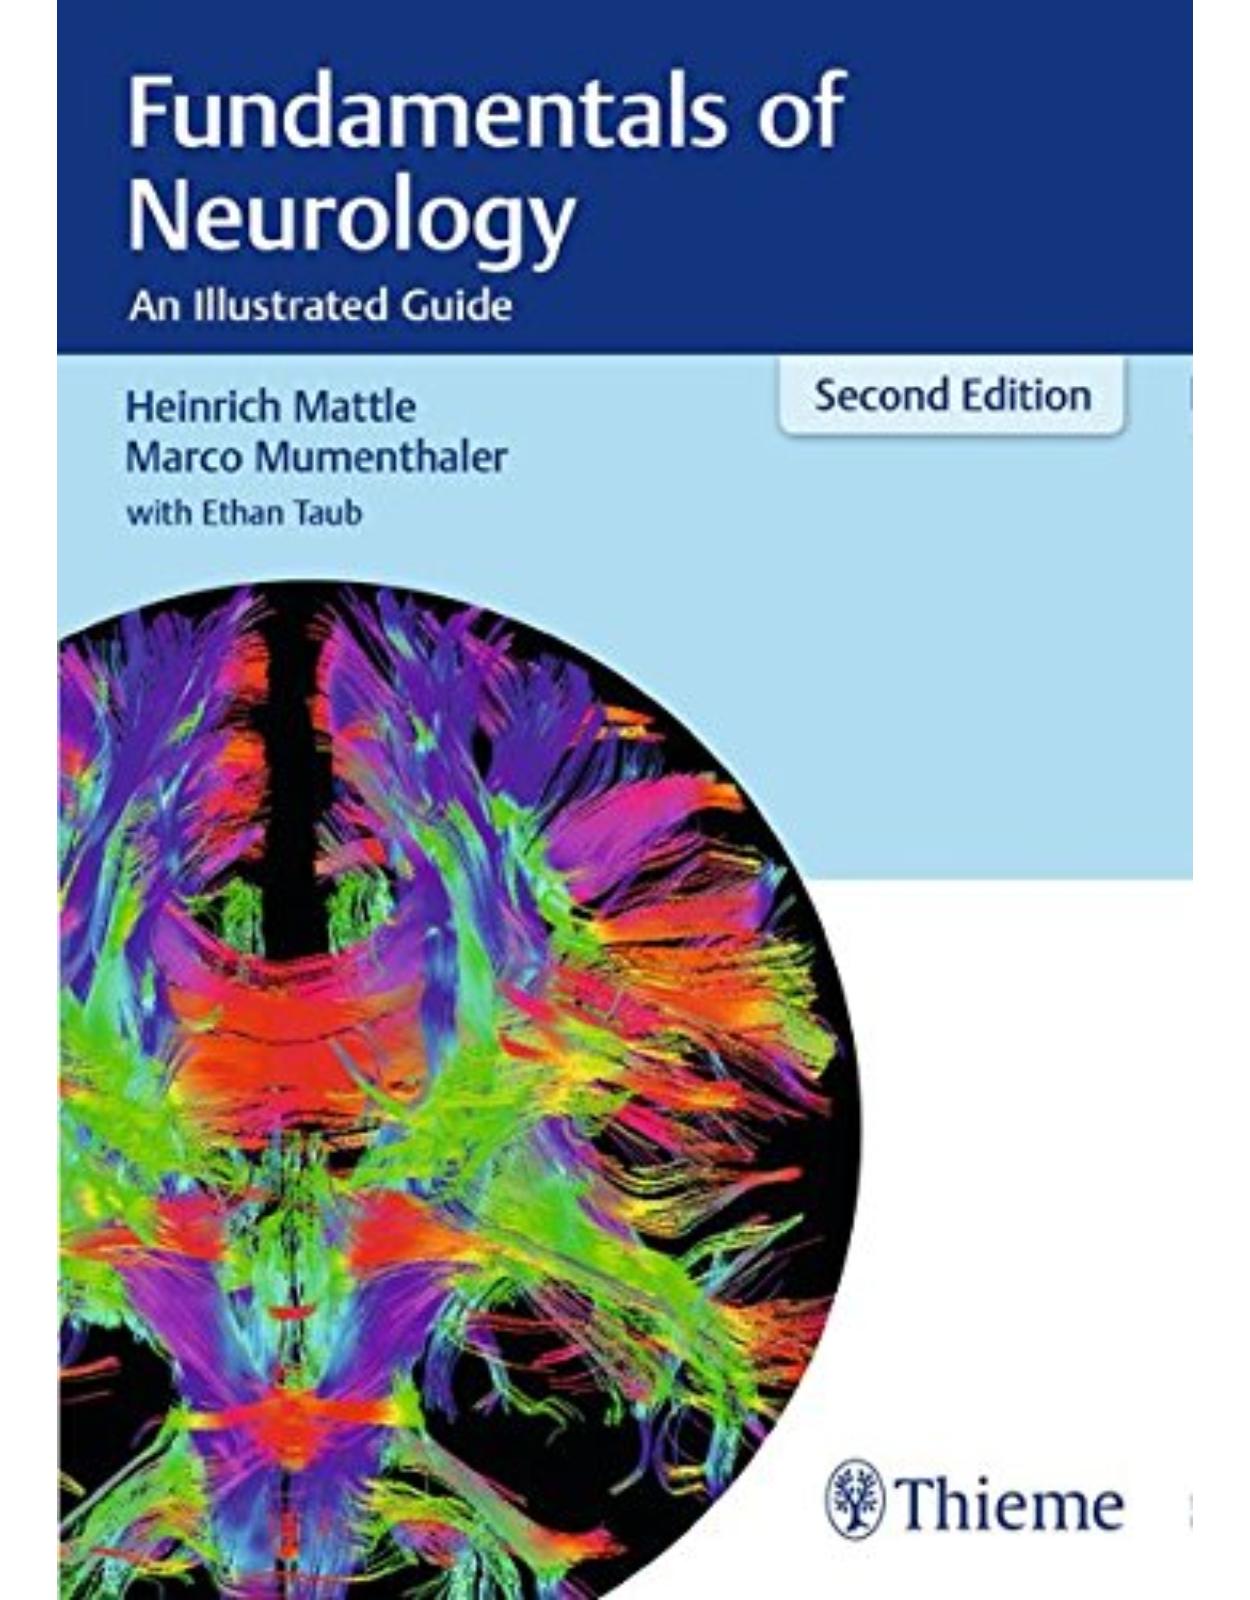 Fundamentals of Neurology: An Illustrated Guide